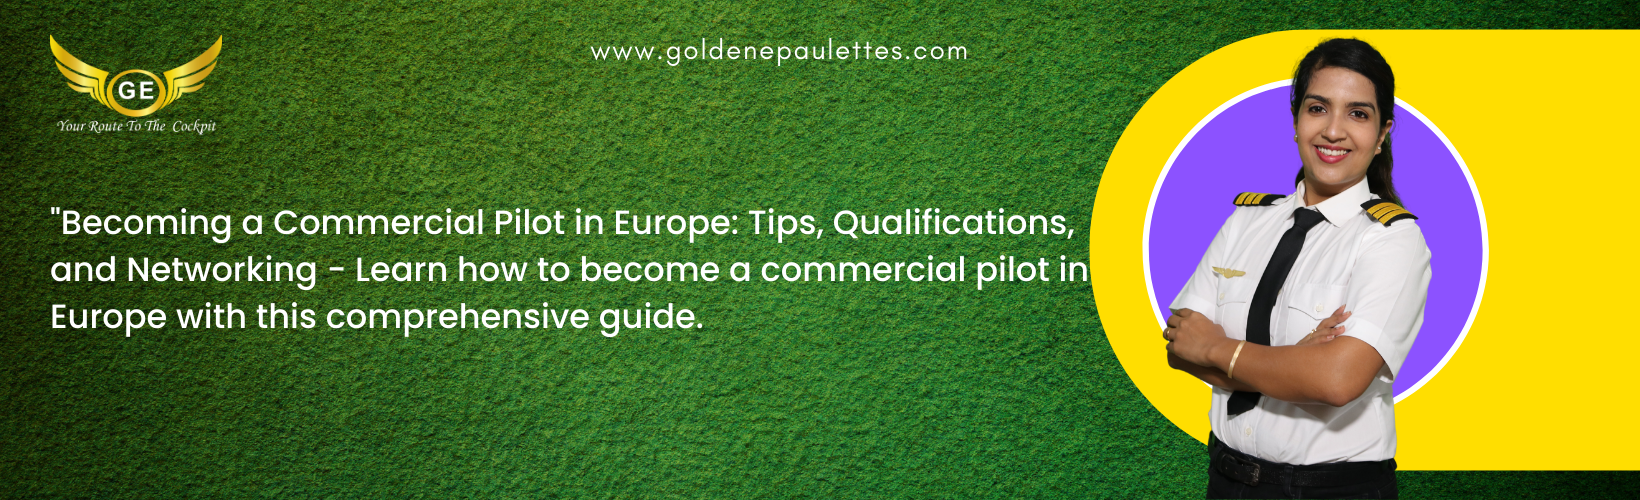 Tips on Becoming a Commercial Pilot in Europe